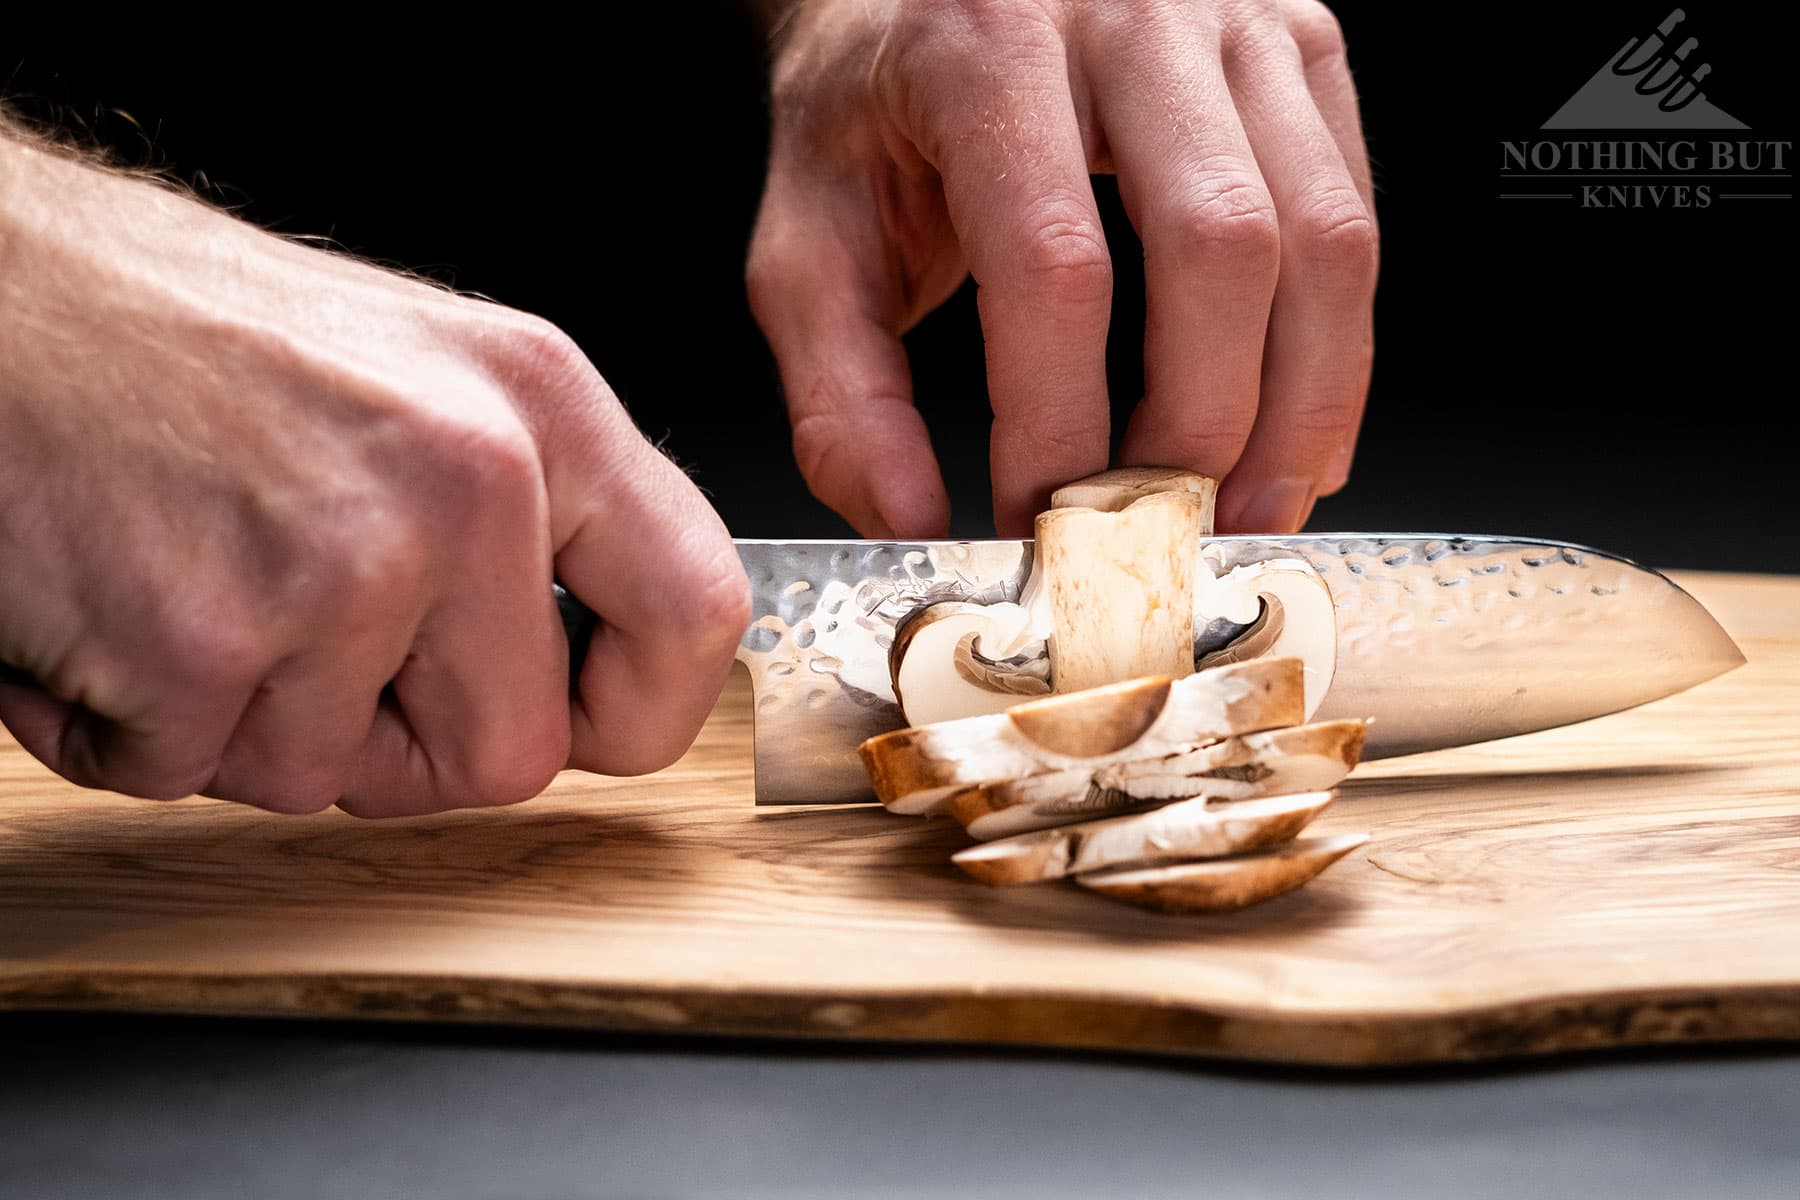 A close-up of the Enso HD santoku knife being used to slice a mushroom.